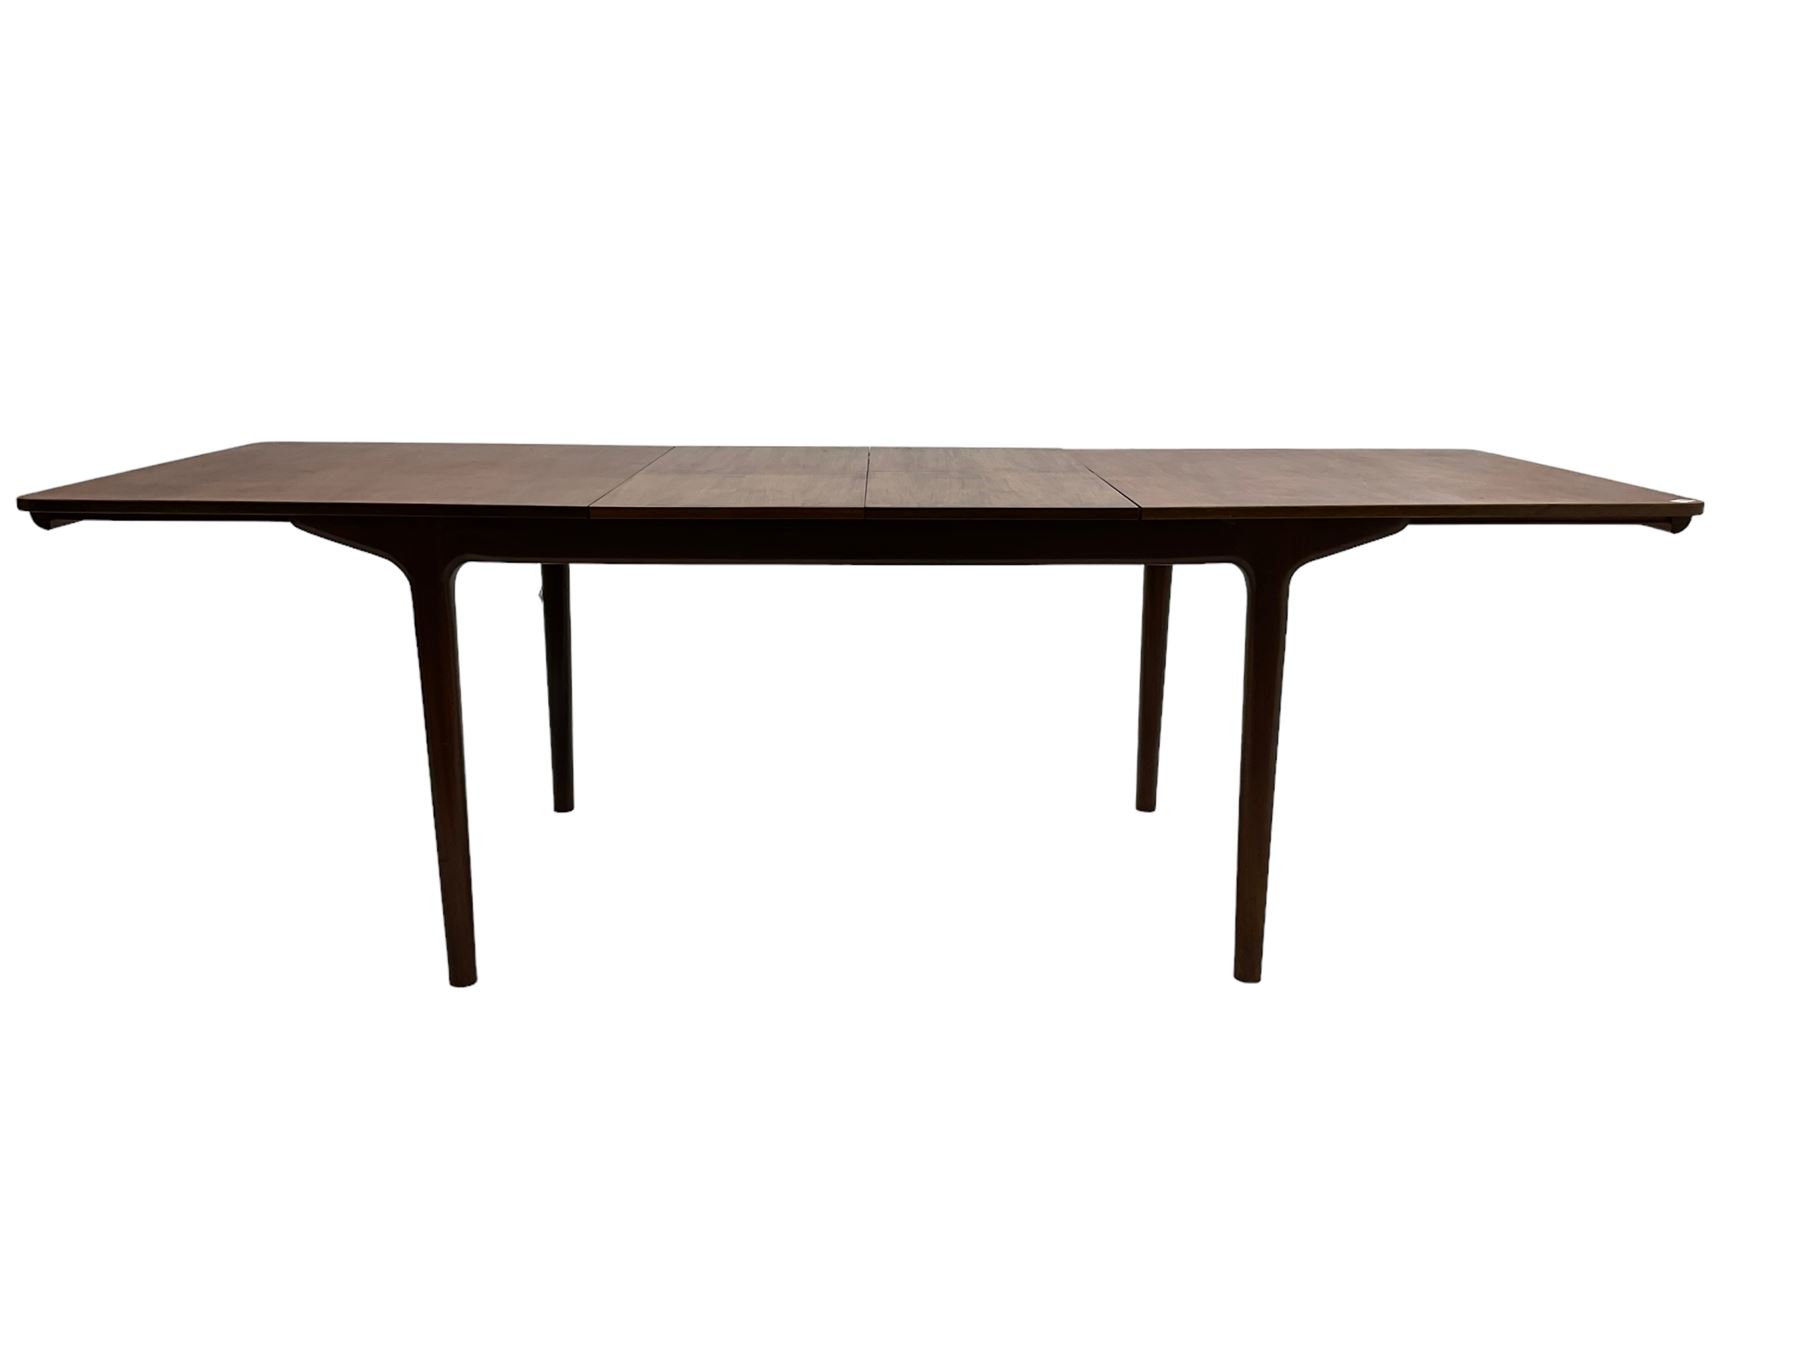 Tom Robertson for AH McIntosh & Co of Kirkaldy - mid-20th century teak extending dining table - Image 3 of 10